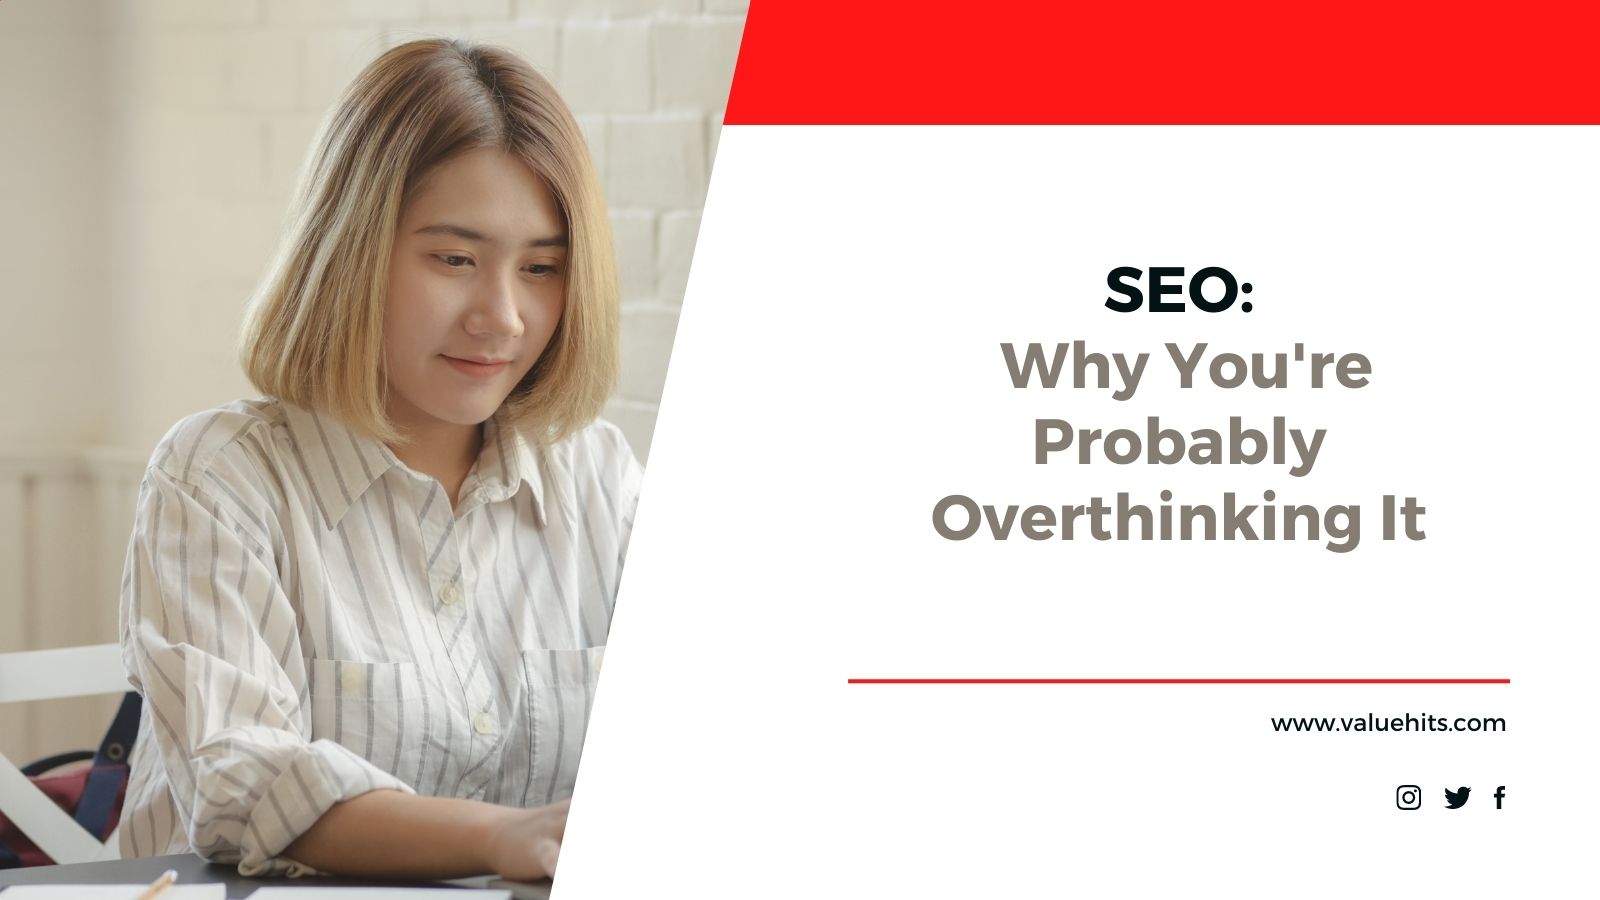 SEO: Why You're Probably Overthinking It